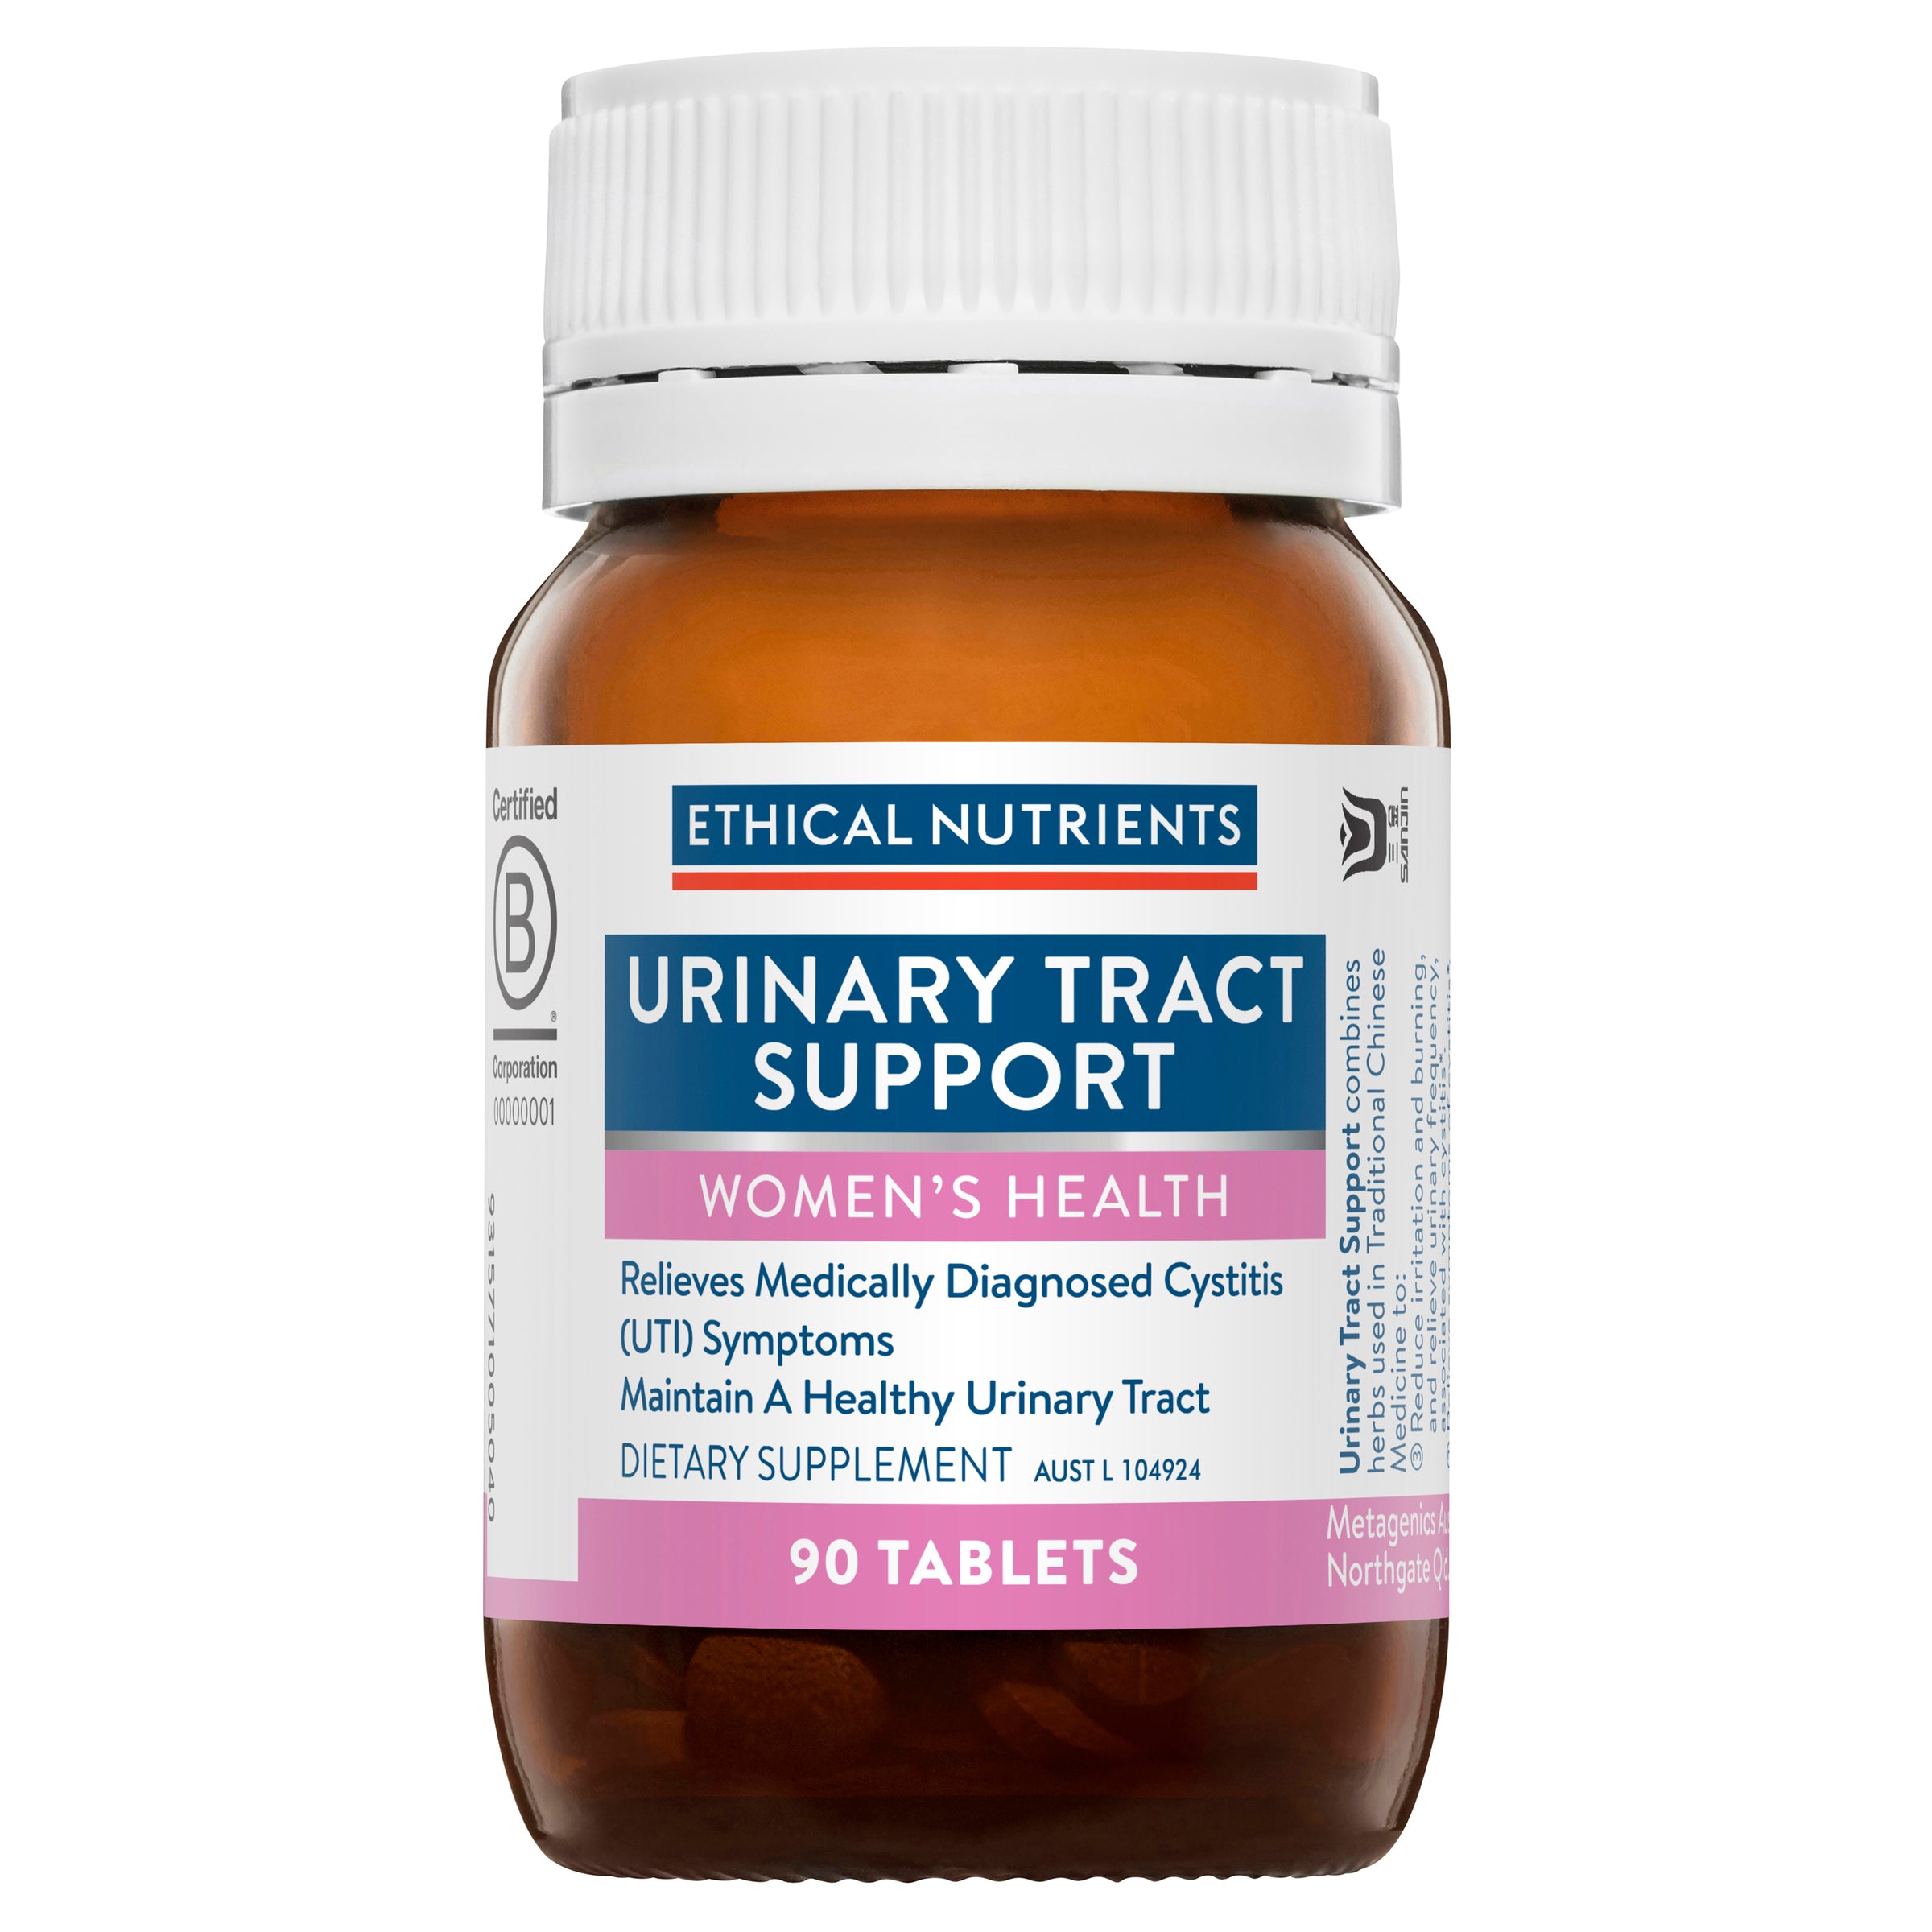 Ethical Nutrients Urinary Tract Support 90 Tablets #size_90 tablets